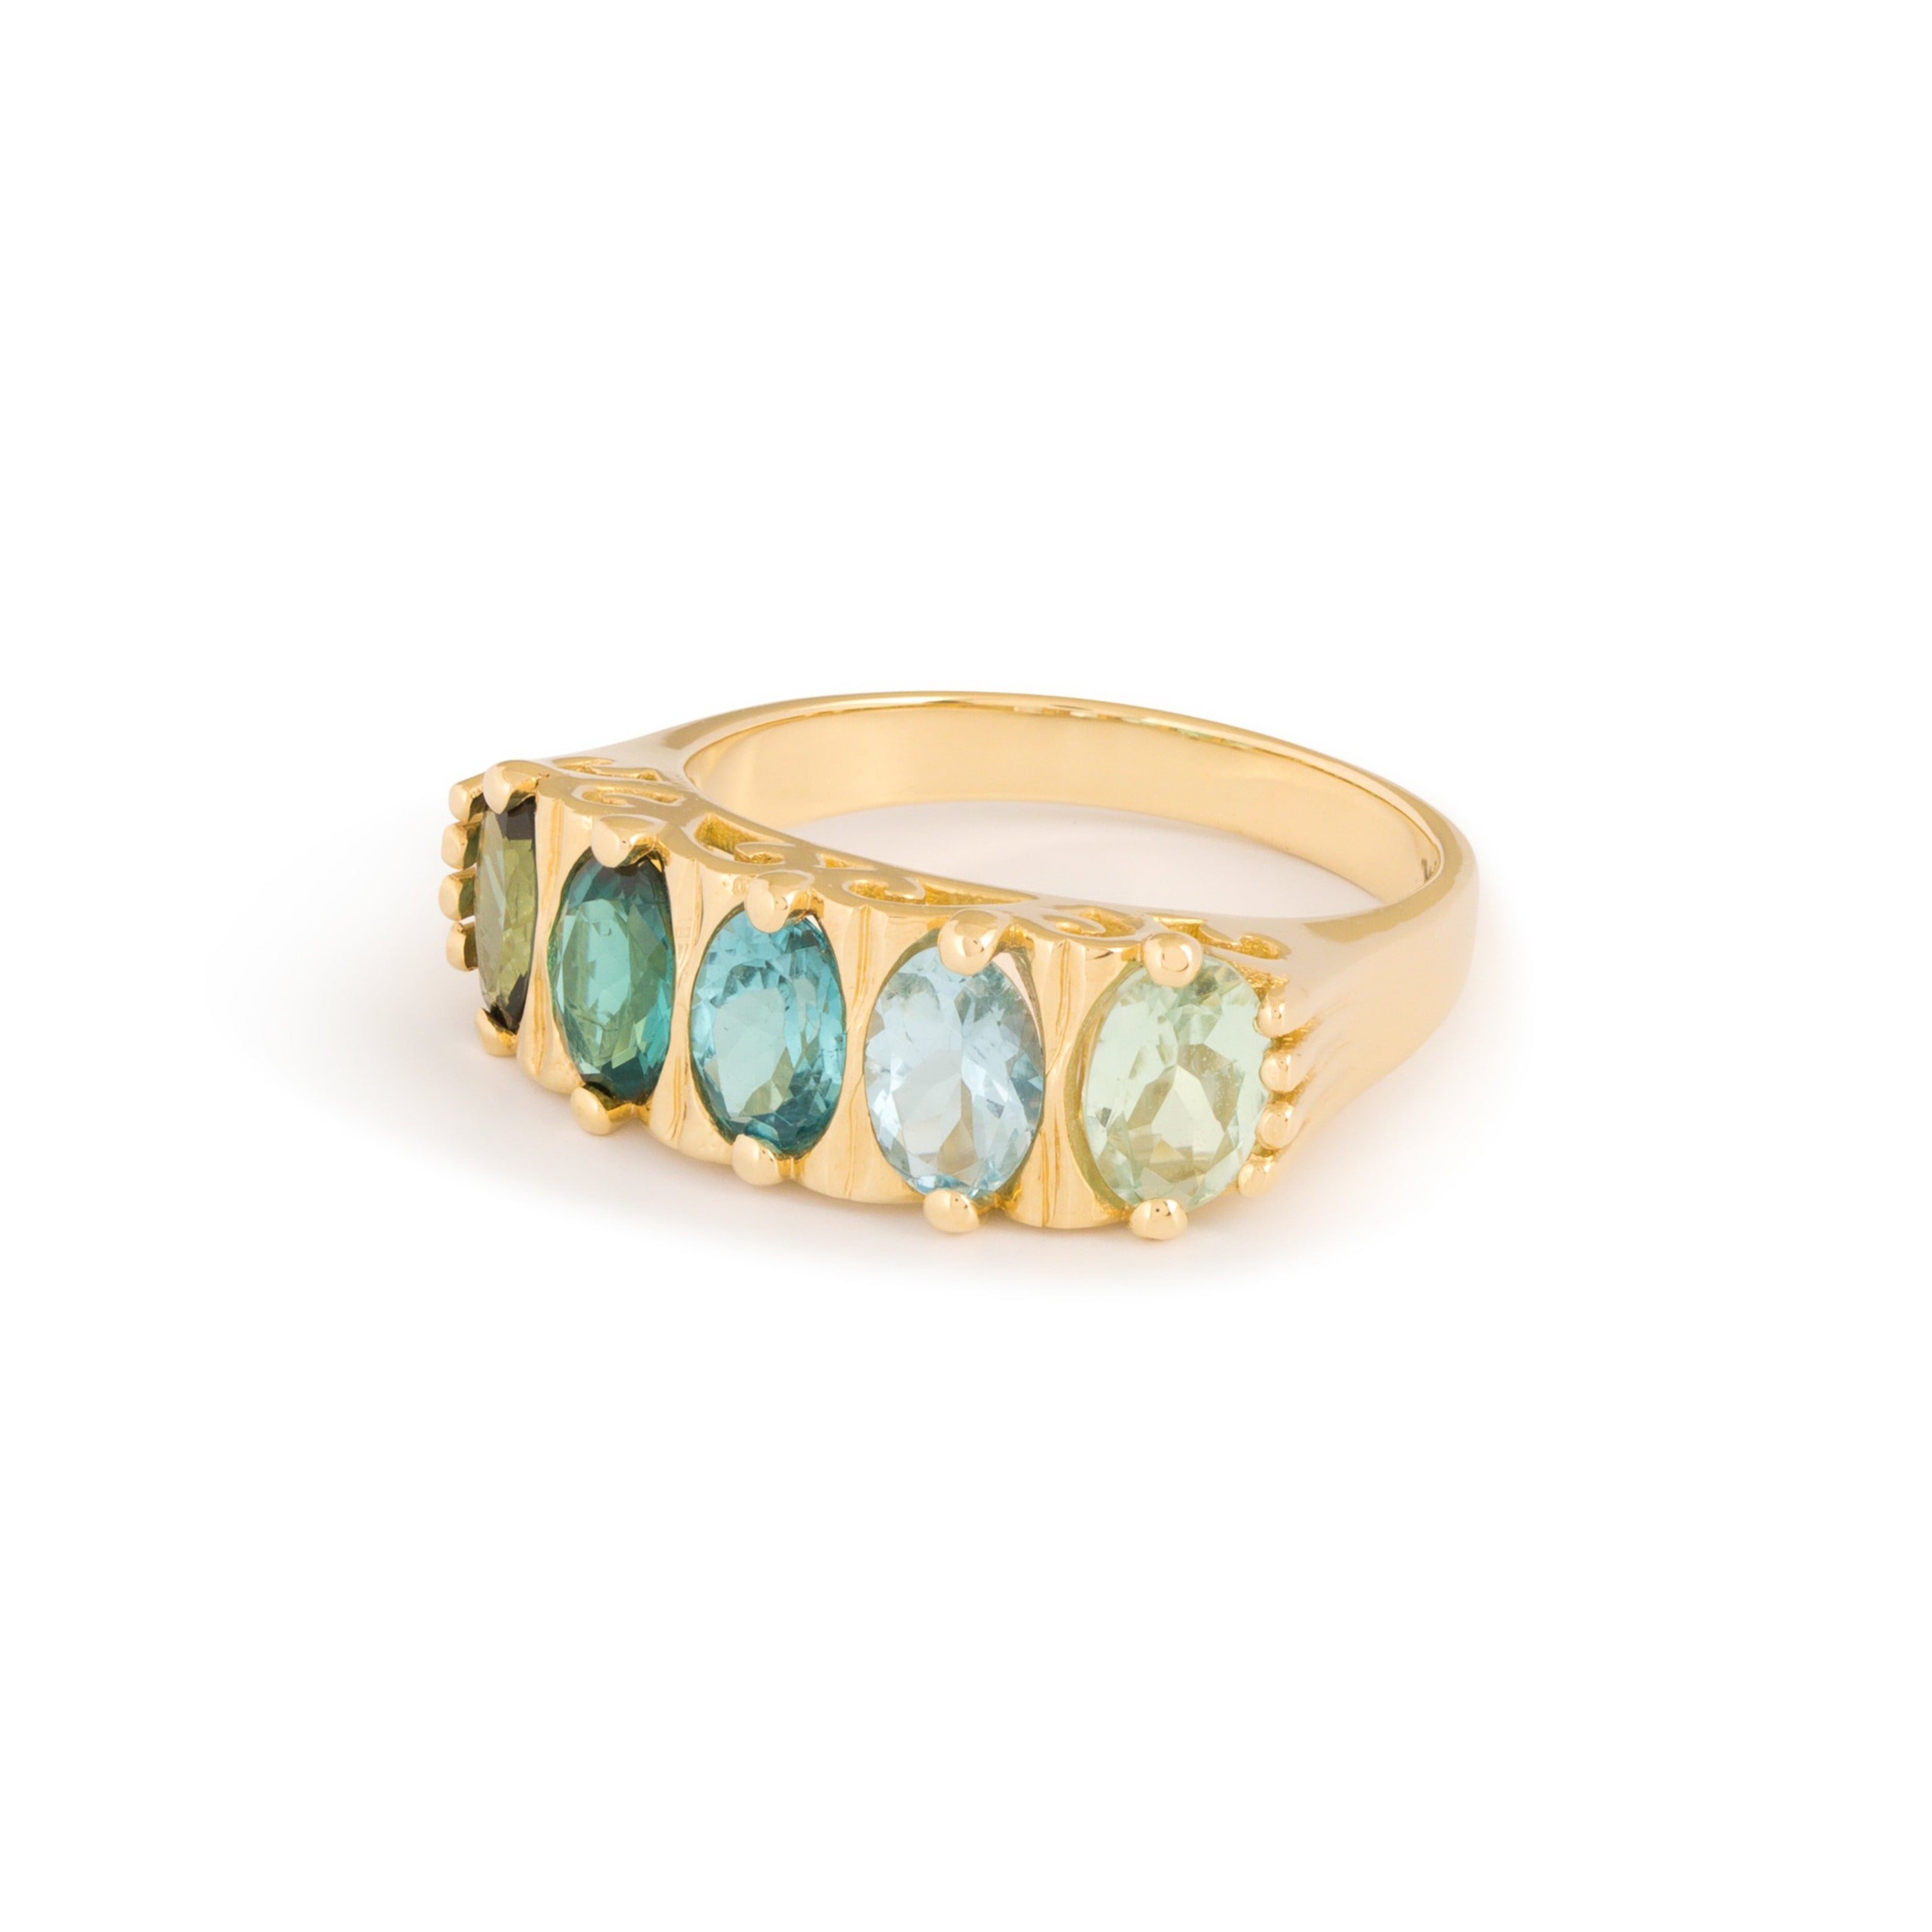 The F&B Ocean Ombre Ring